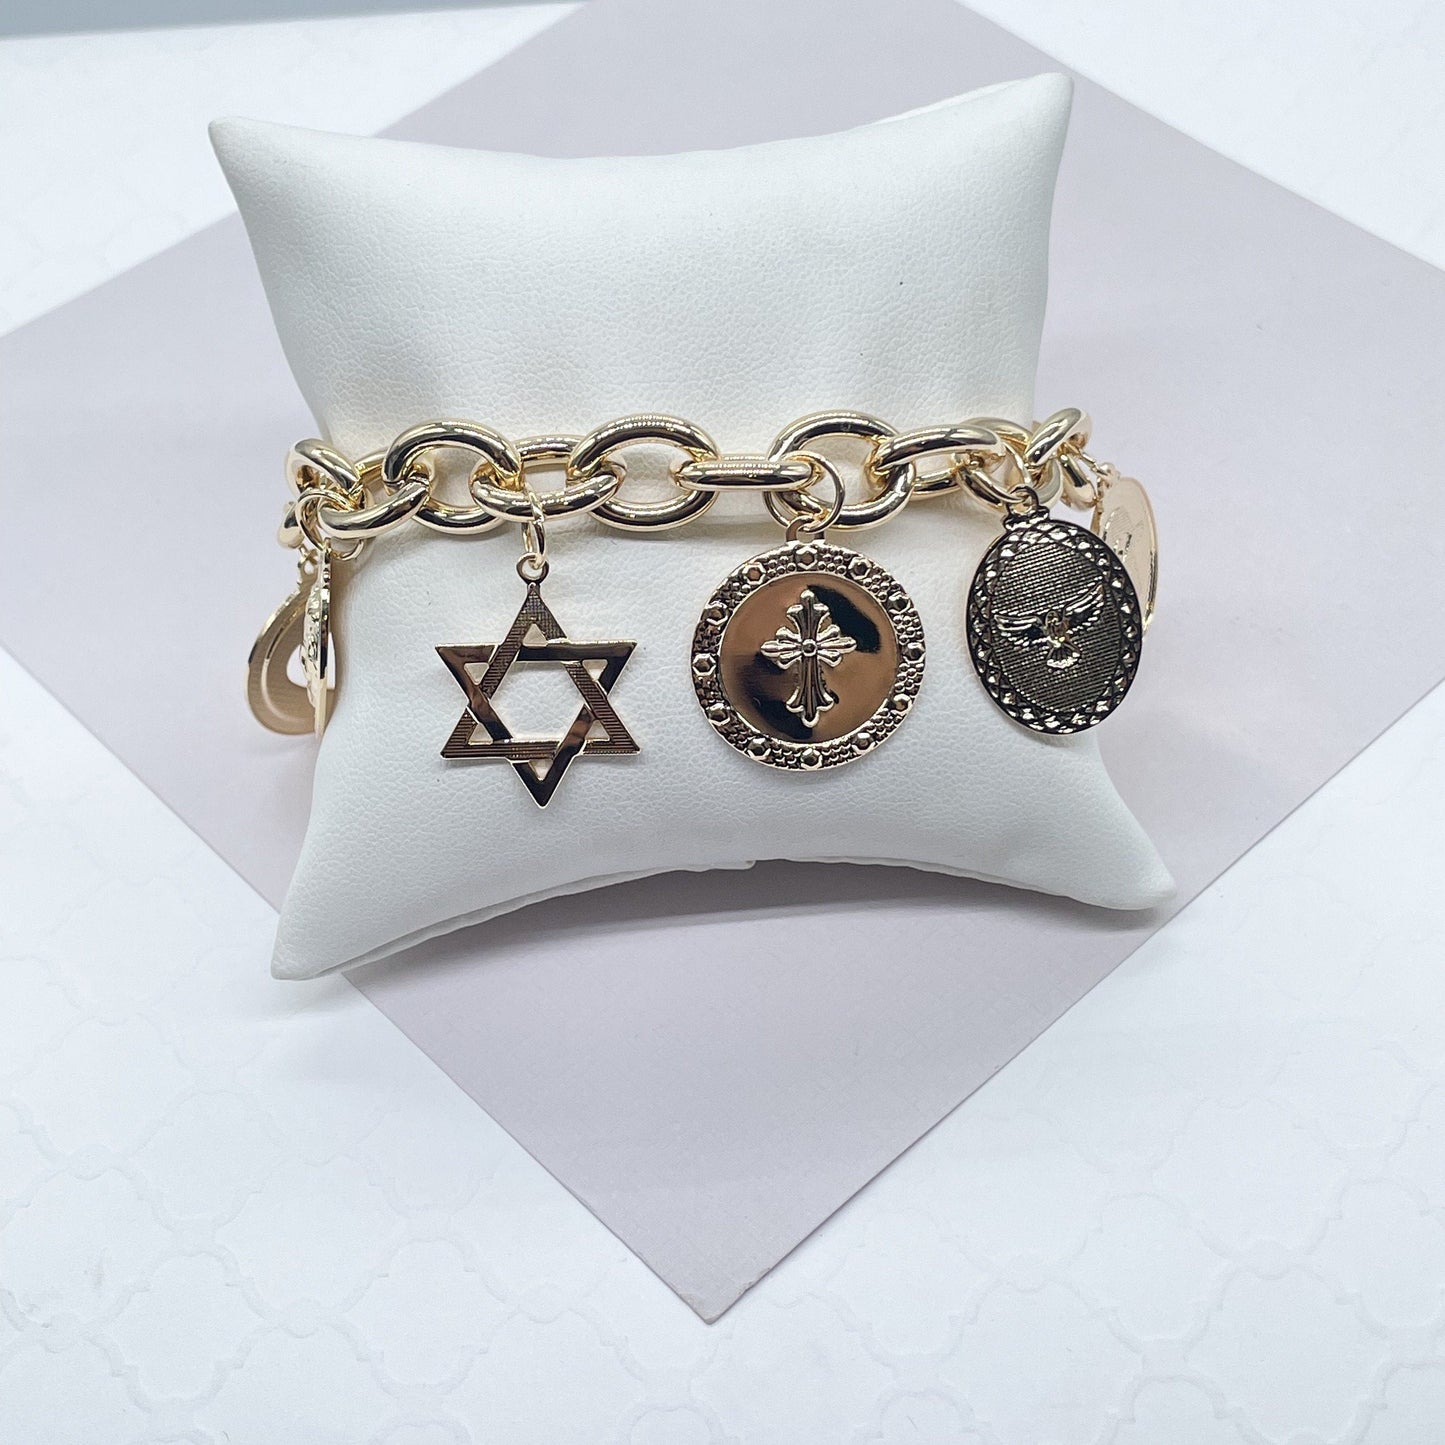 18k Gold Filled Bracelet With Mixed Religious and Protection Charms